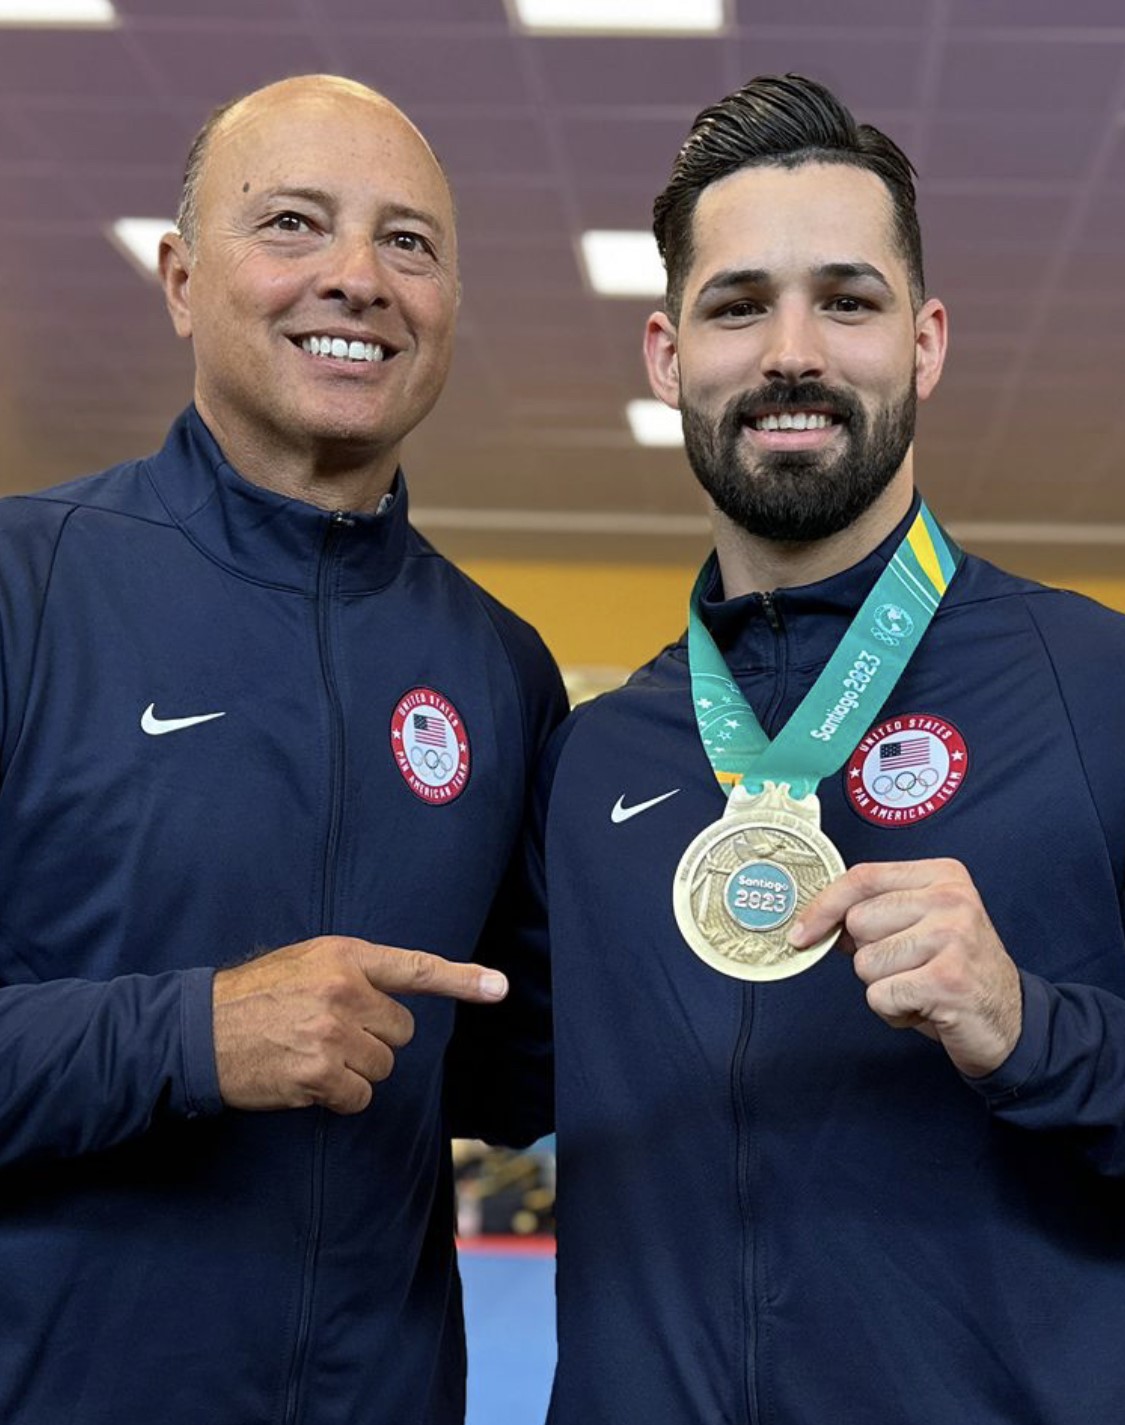 Carlo Guadagno, DC, DACBSP®, ICSC, FICC, a National University of Health Sciences’ Florida faculty member, poses with Gold medalist Ariel Torres Karate.